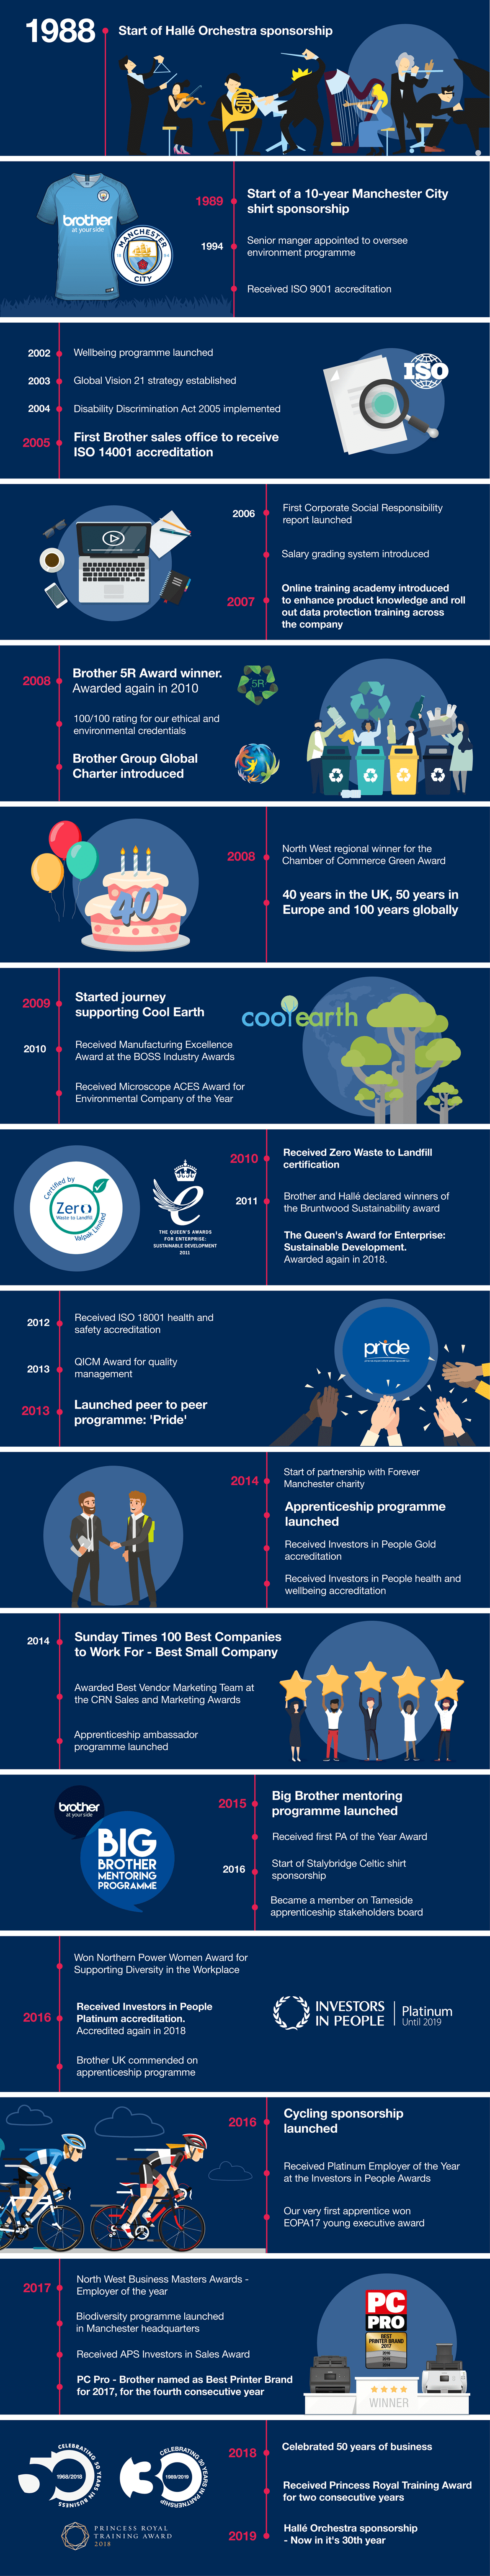 history-brother-infographic